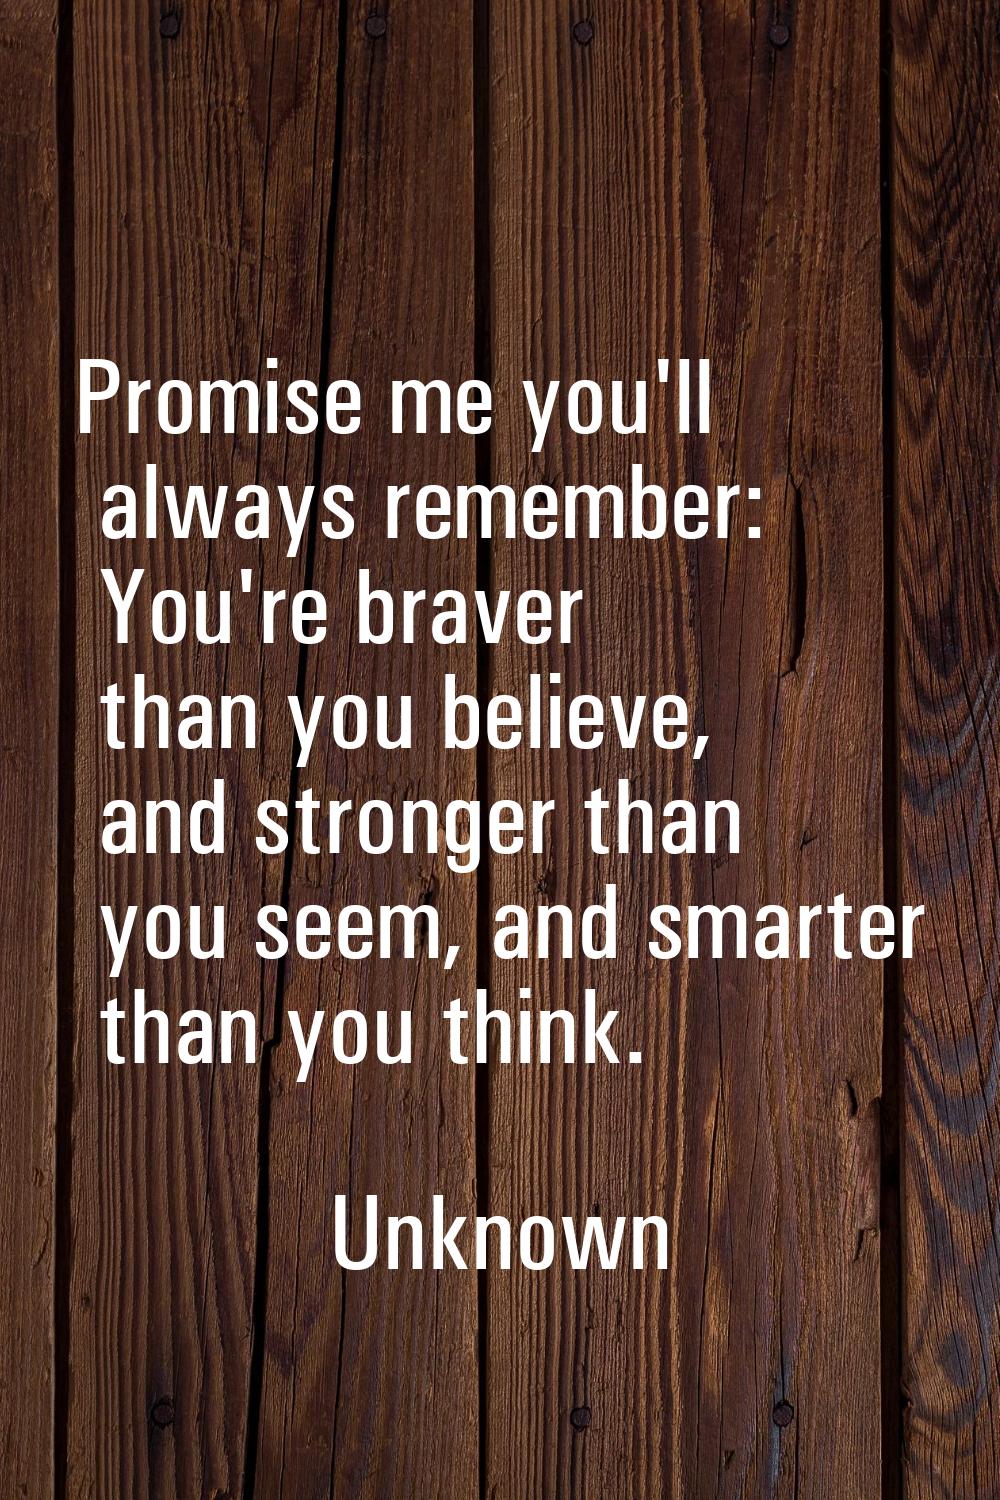 Promise me you'll always remember: You're braver than you believe, and stronger than you seem, and 